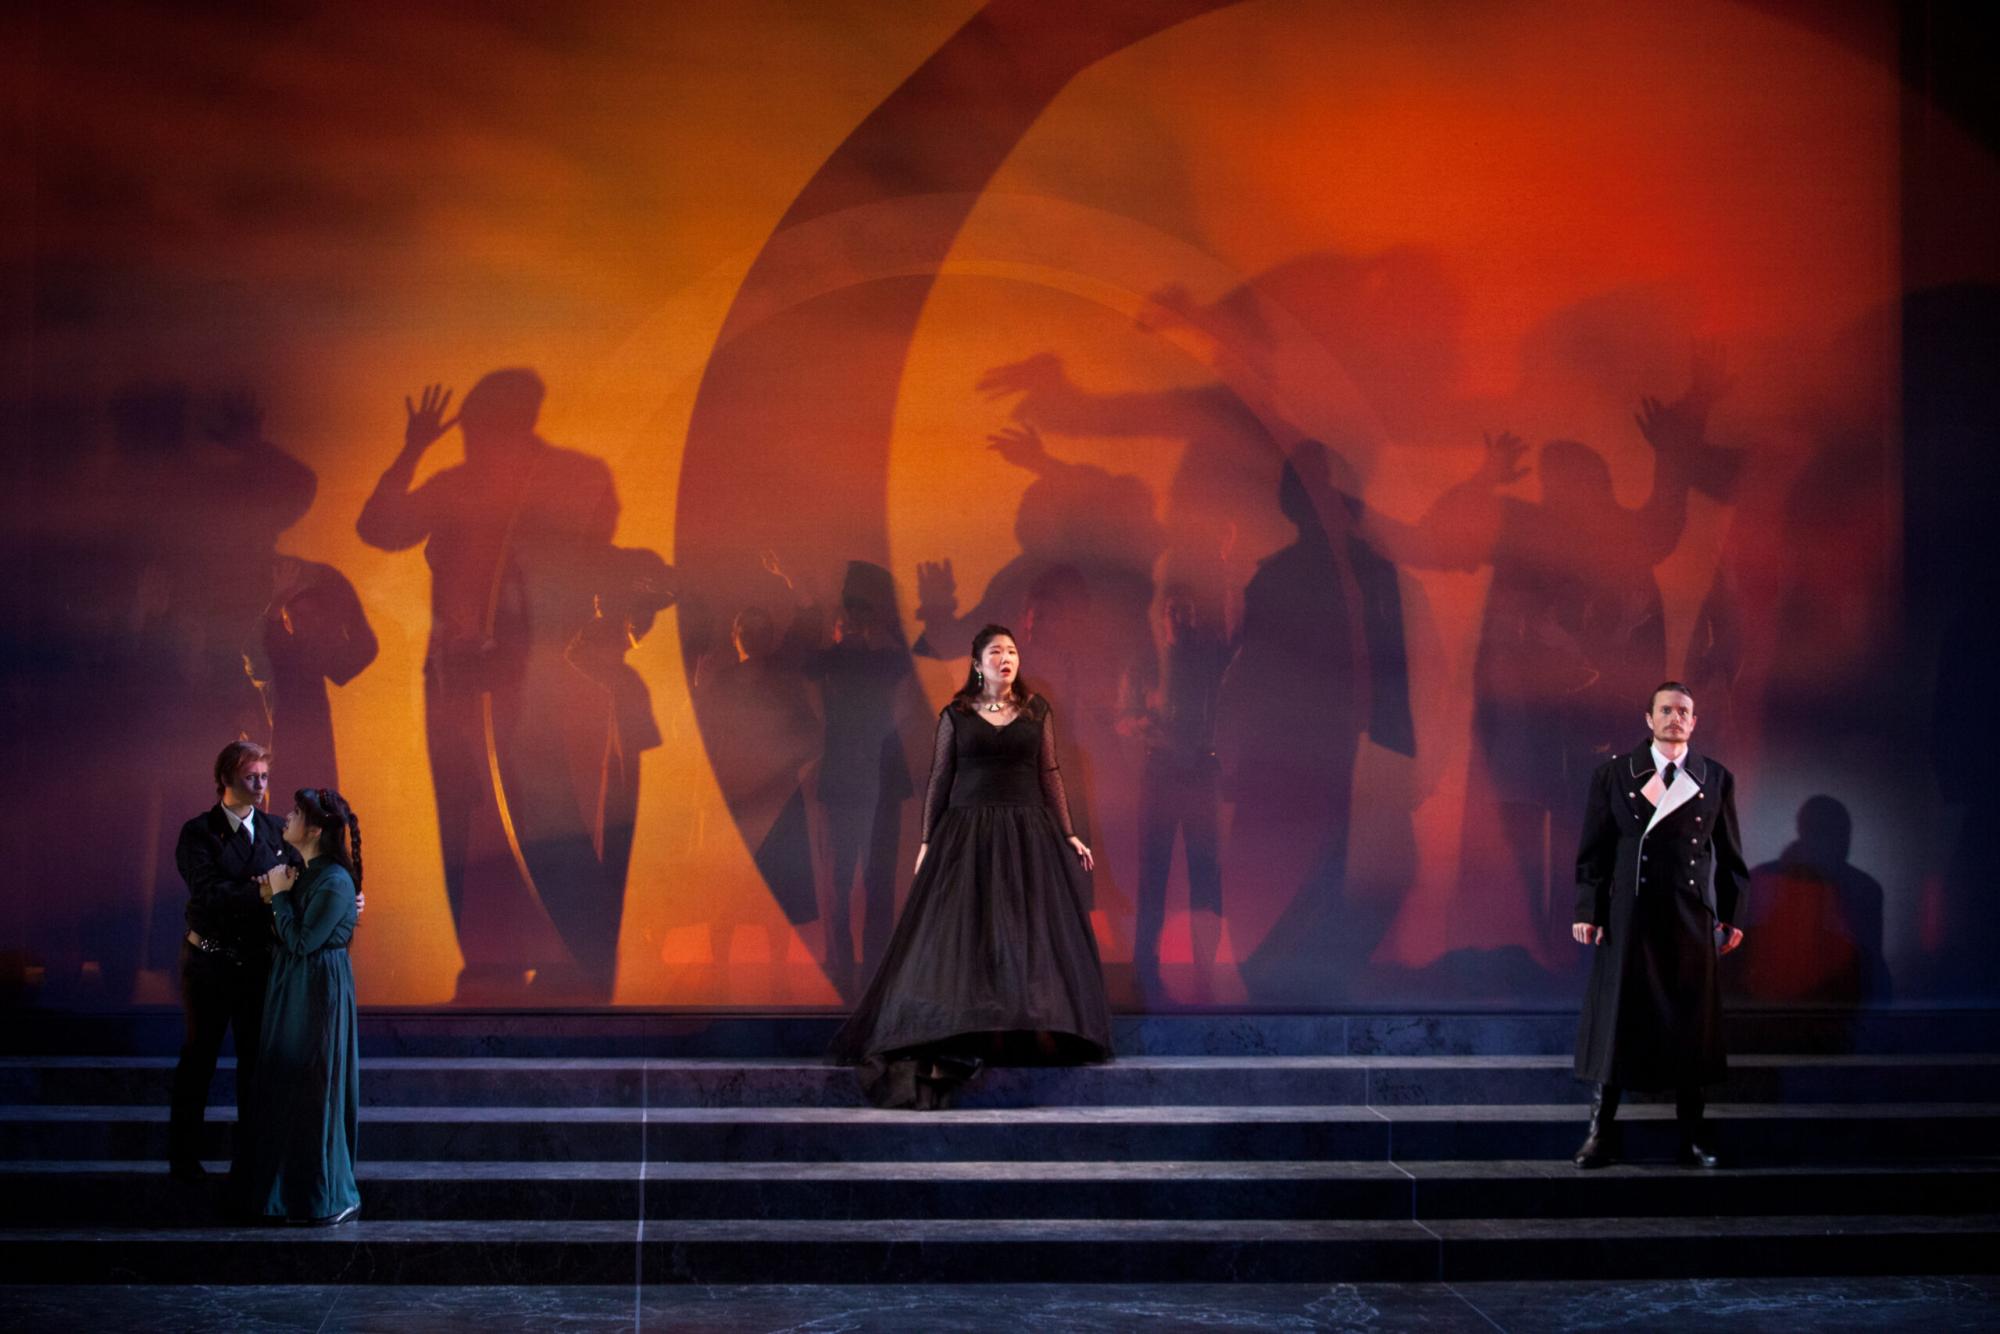 A woman in a black dress stands on stage with colorful silhouettes behind her